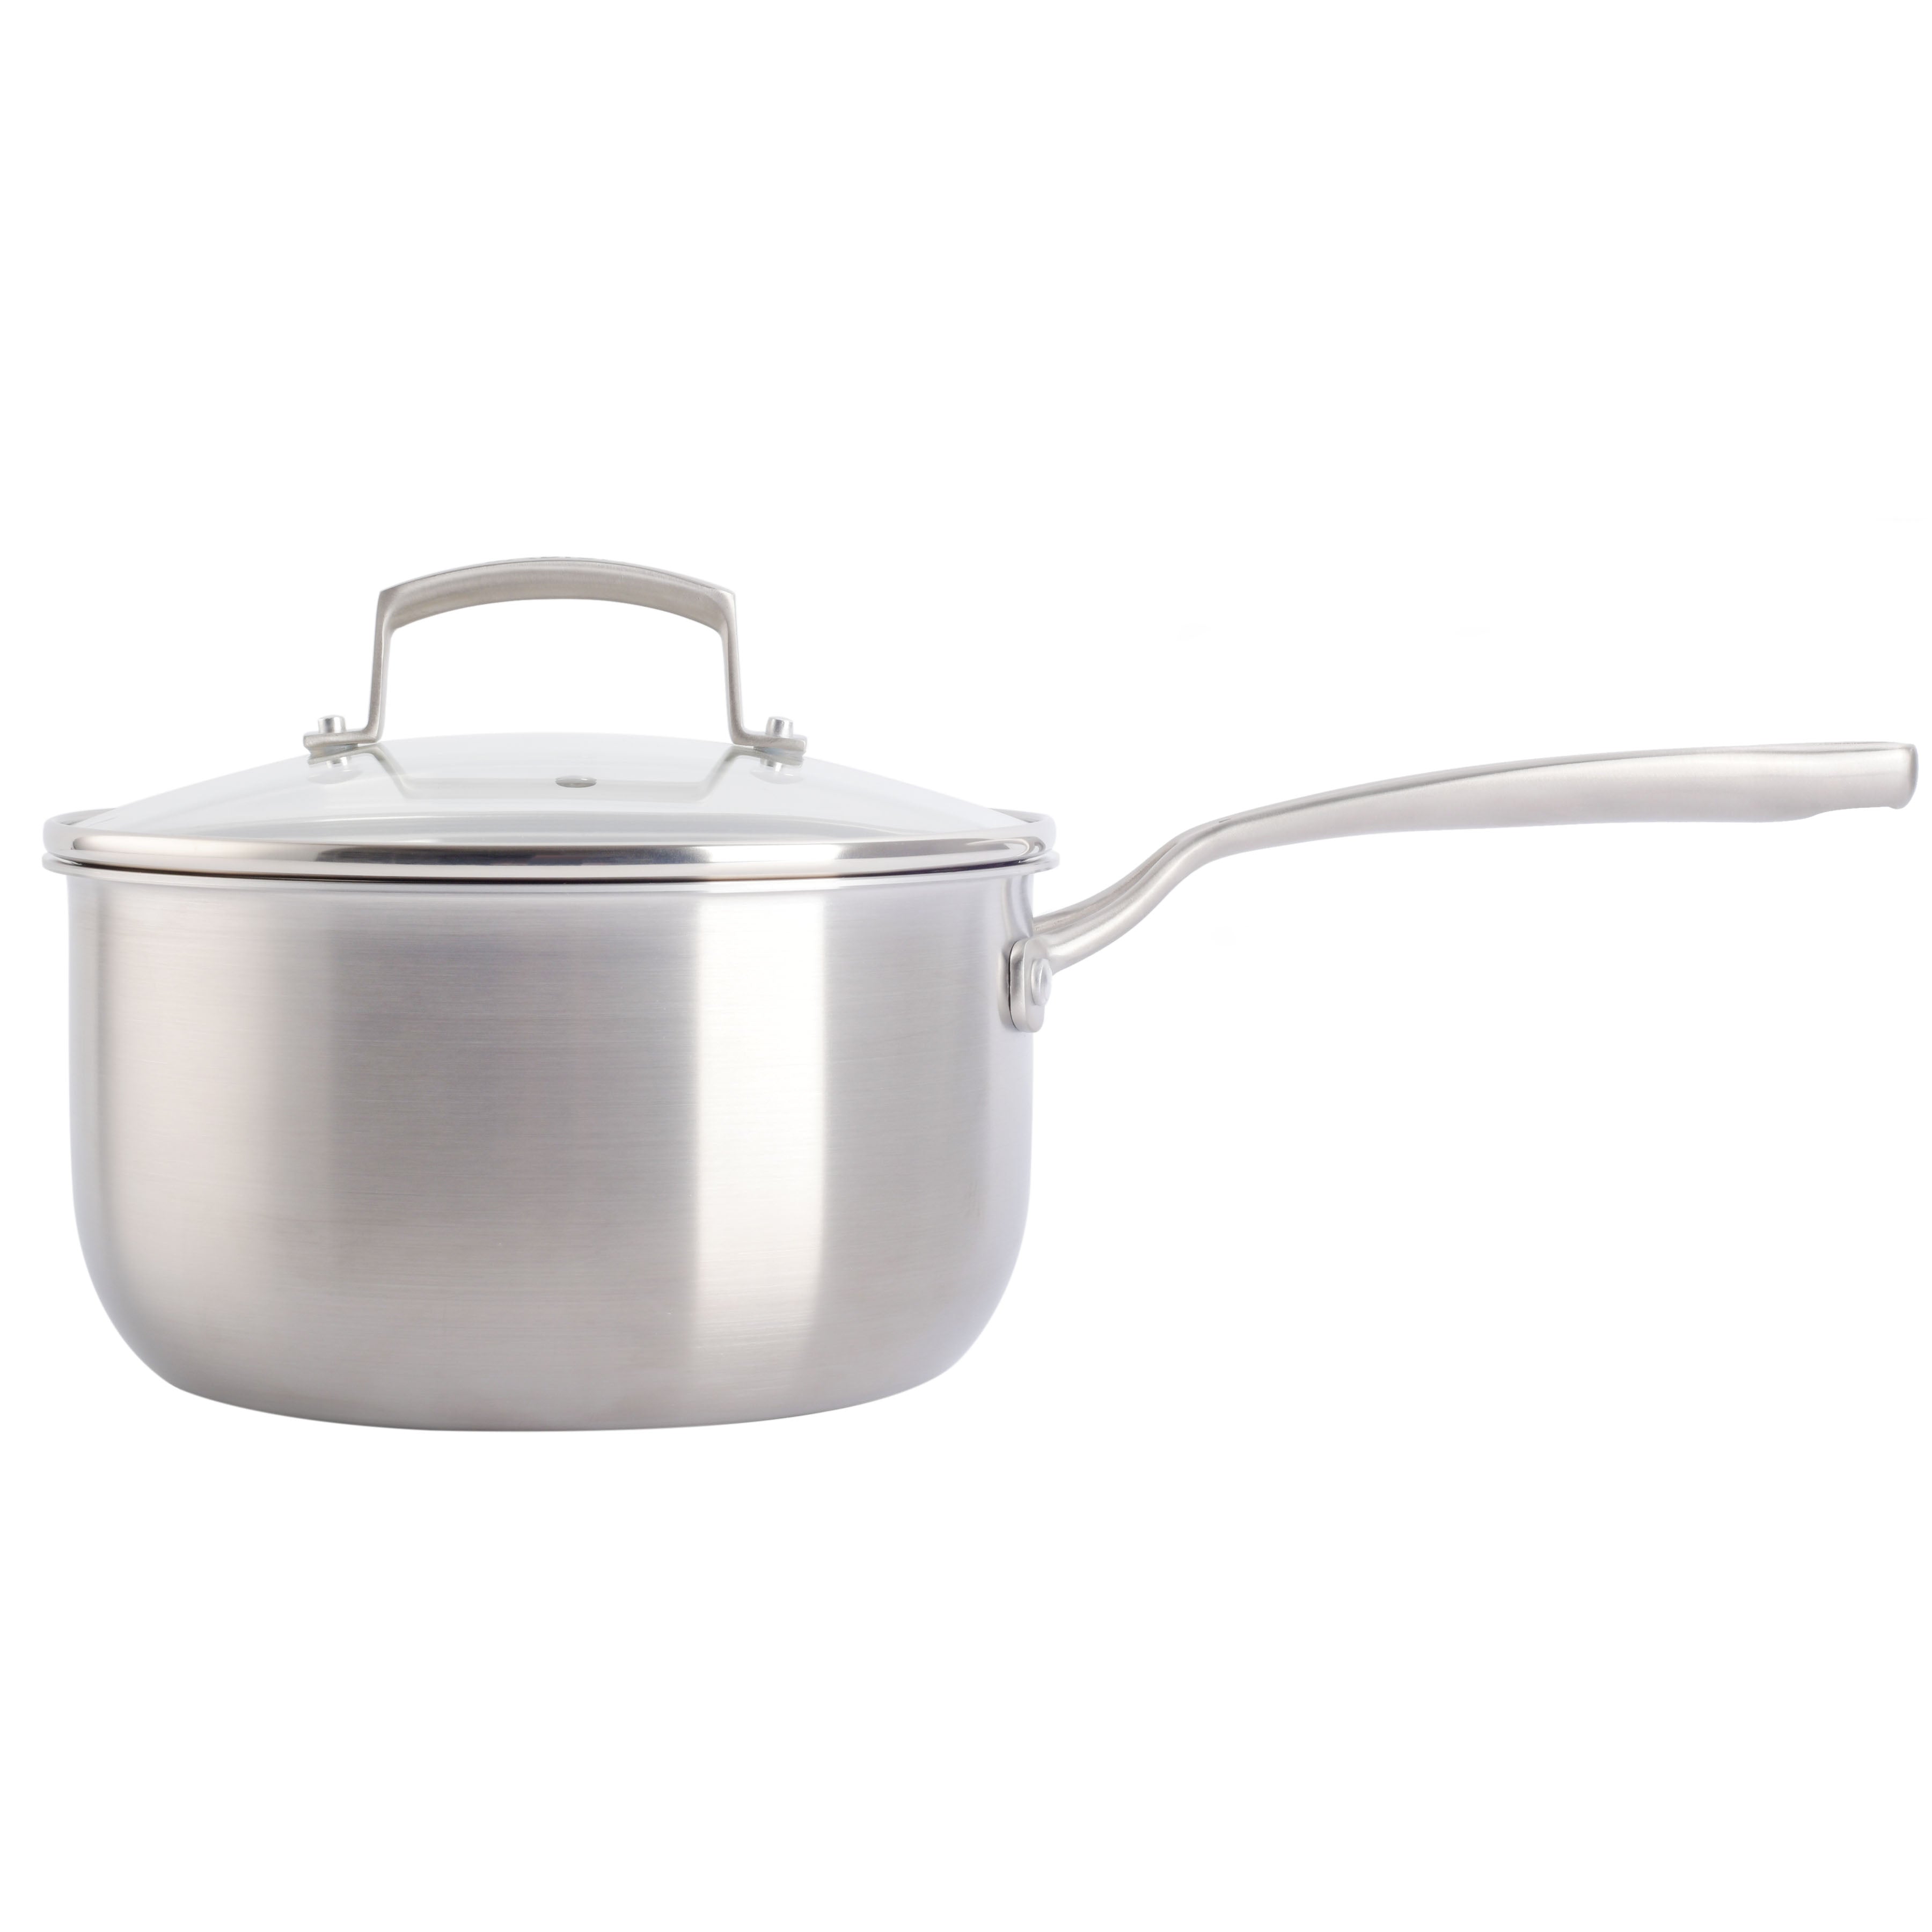 Babish Saute Pan with Lid, Stainless Steel, Covered, Handle & Lid, 5 Quart